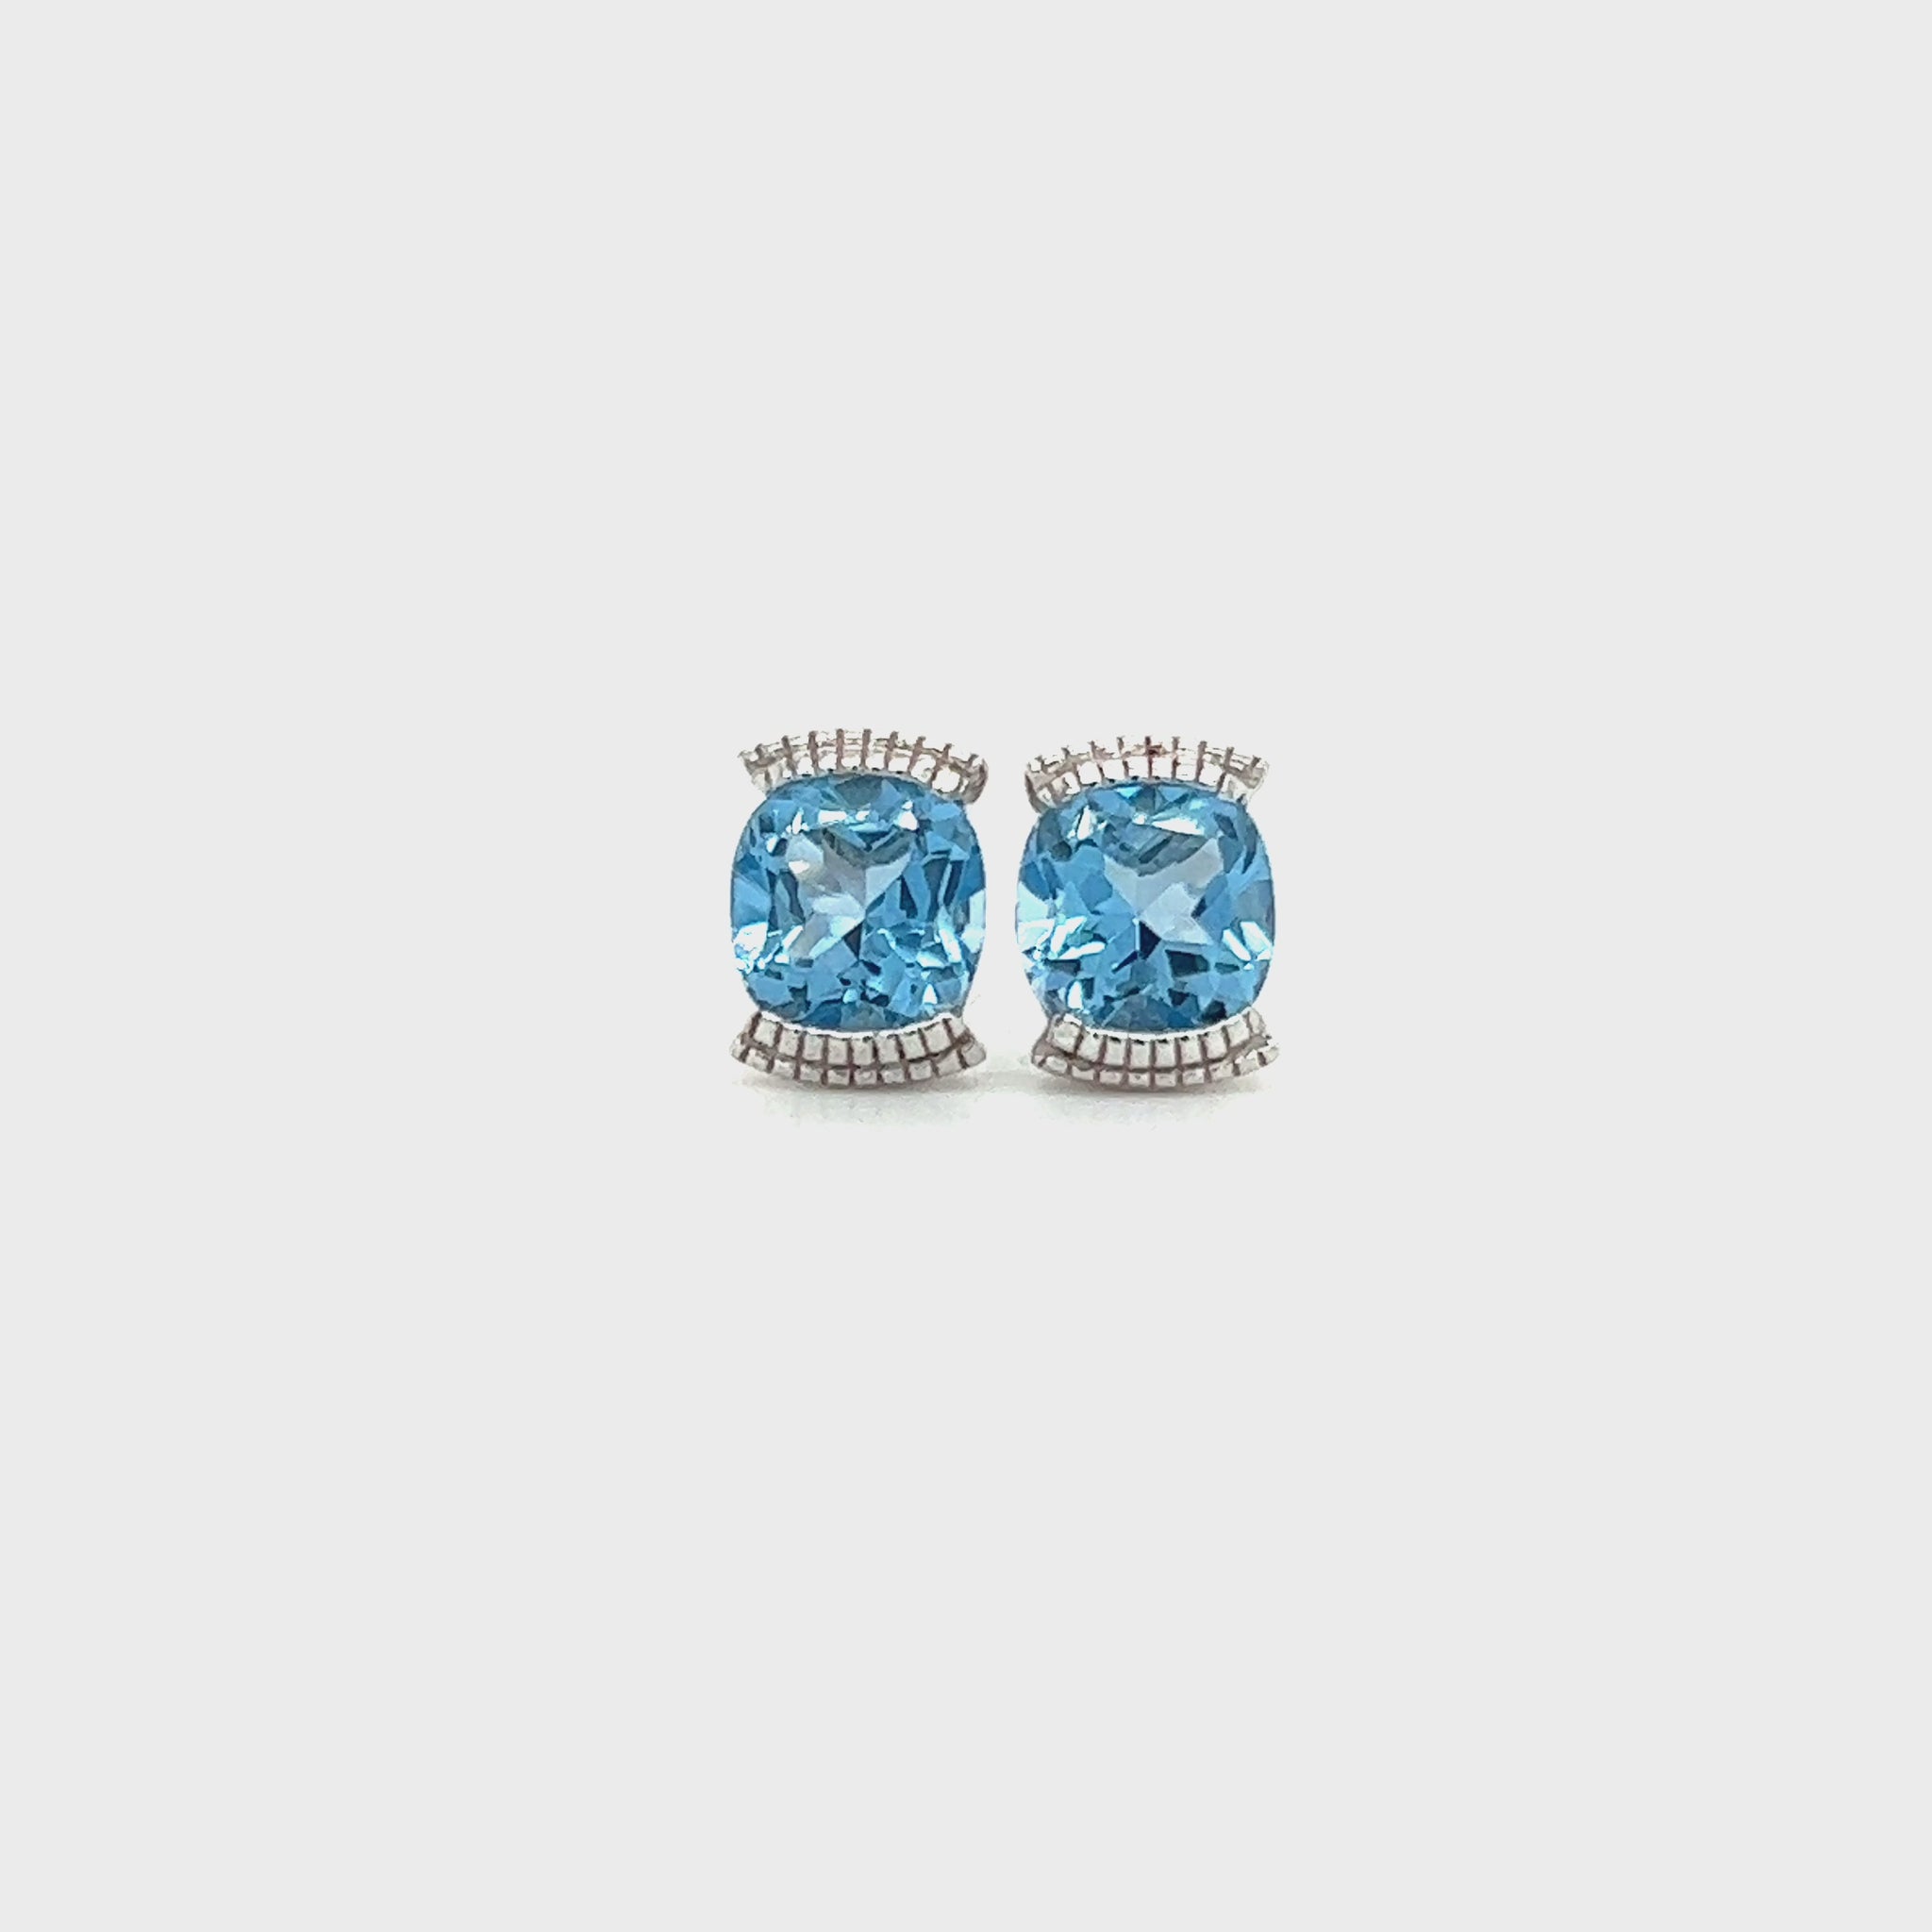 Cushion Blue Topaz Stud Earrings with 1.78ctw of Swiss Blue Topaz in 14K White Gold Video